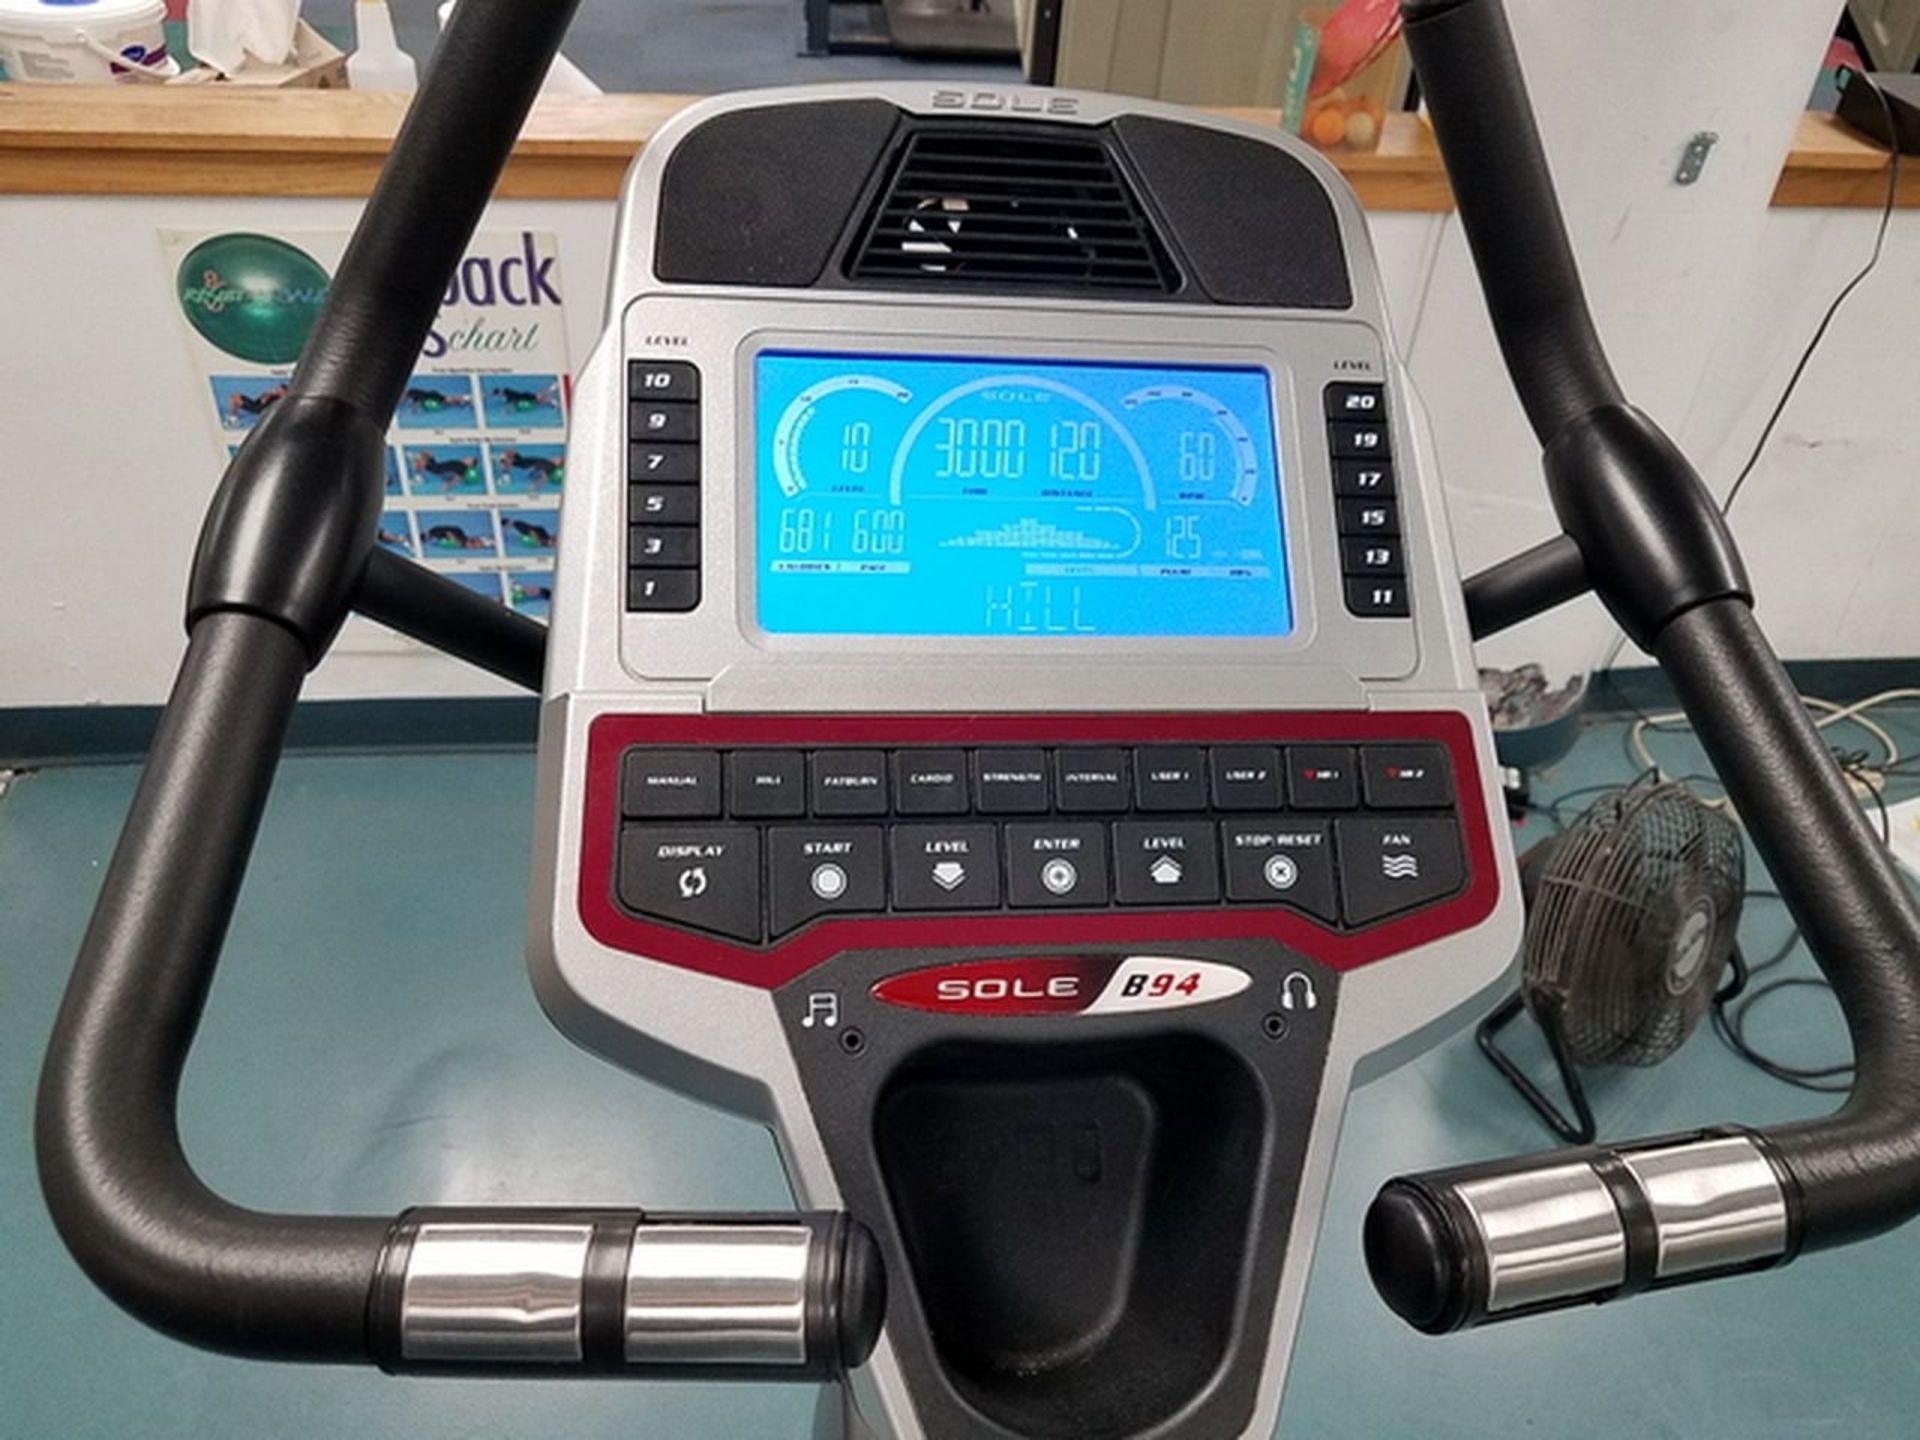 Sole B94 Upright Exercise Bike. A# 41624 Loc: Basement Fitness Room. (Bsmt Fitness Room) - Image 2 of 3